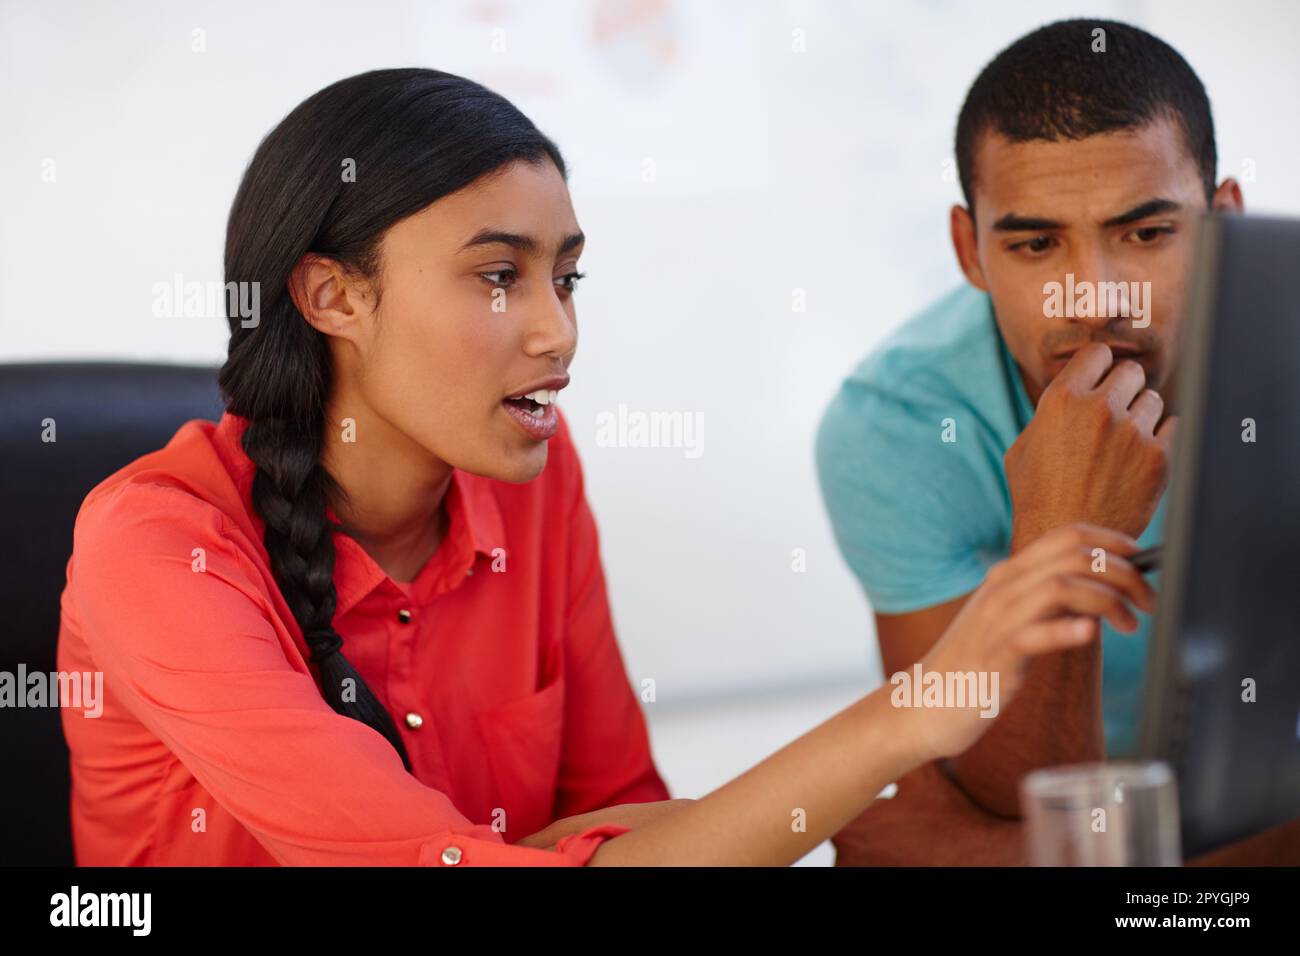 Paying attention to the details. two young designers working together at a computer. Stock Photo